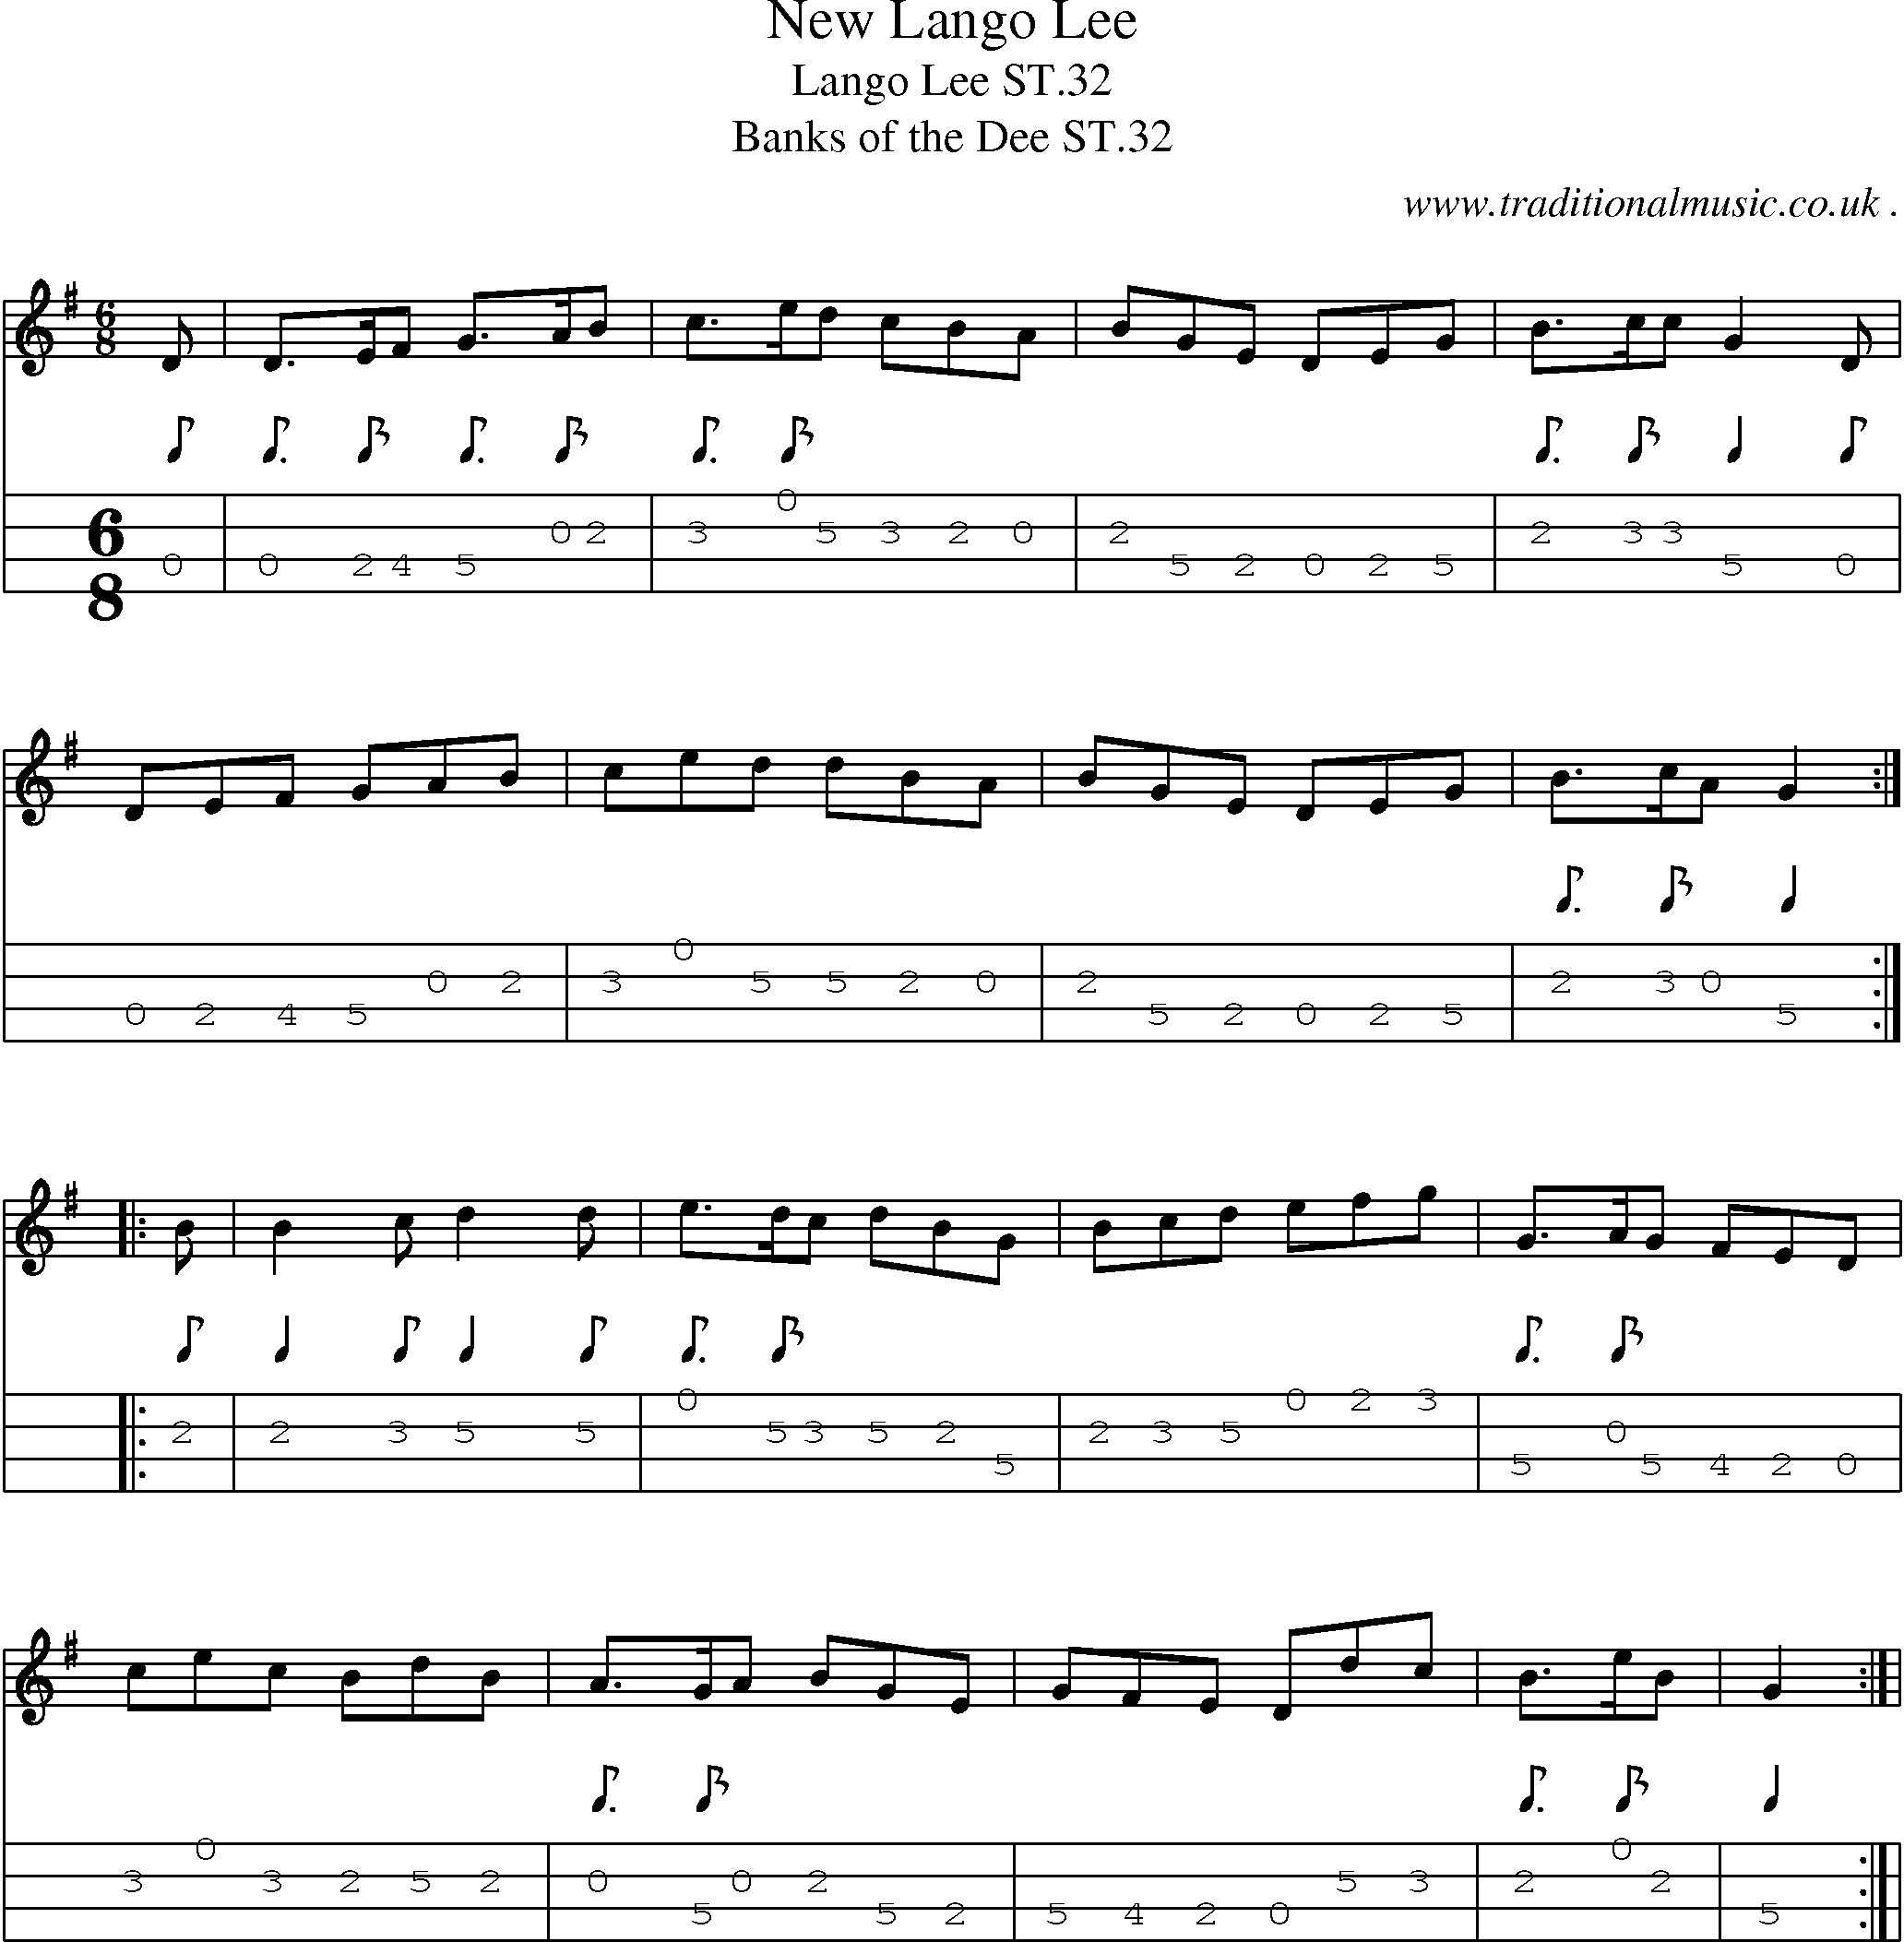 Sheet-Music and Mandolin Tabs for New Lango Lee